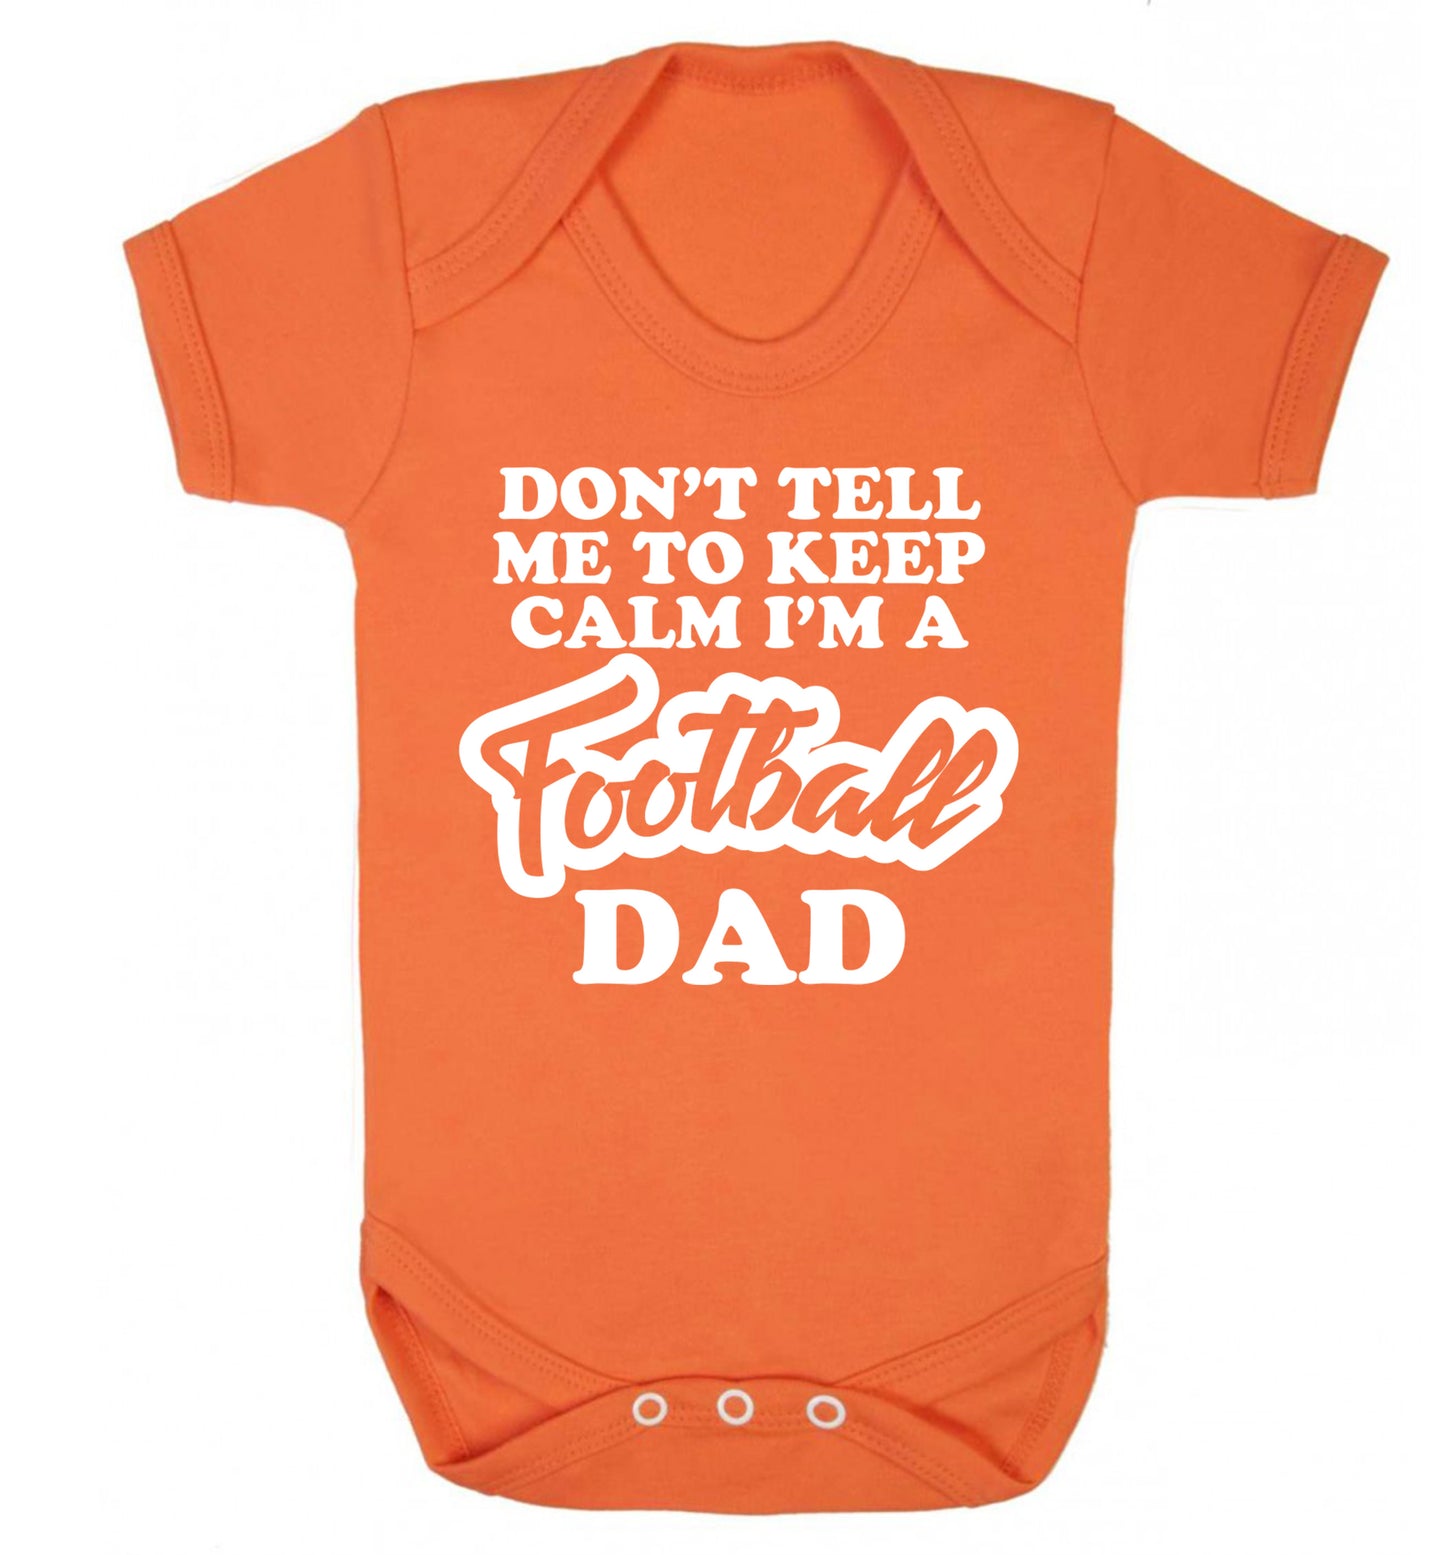 Don't tell me to keep calm I'm a football dad Baby Vest orange 18-24 months